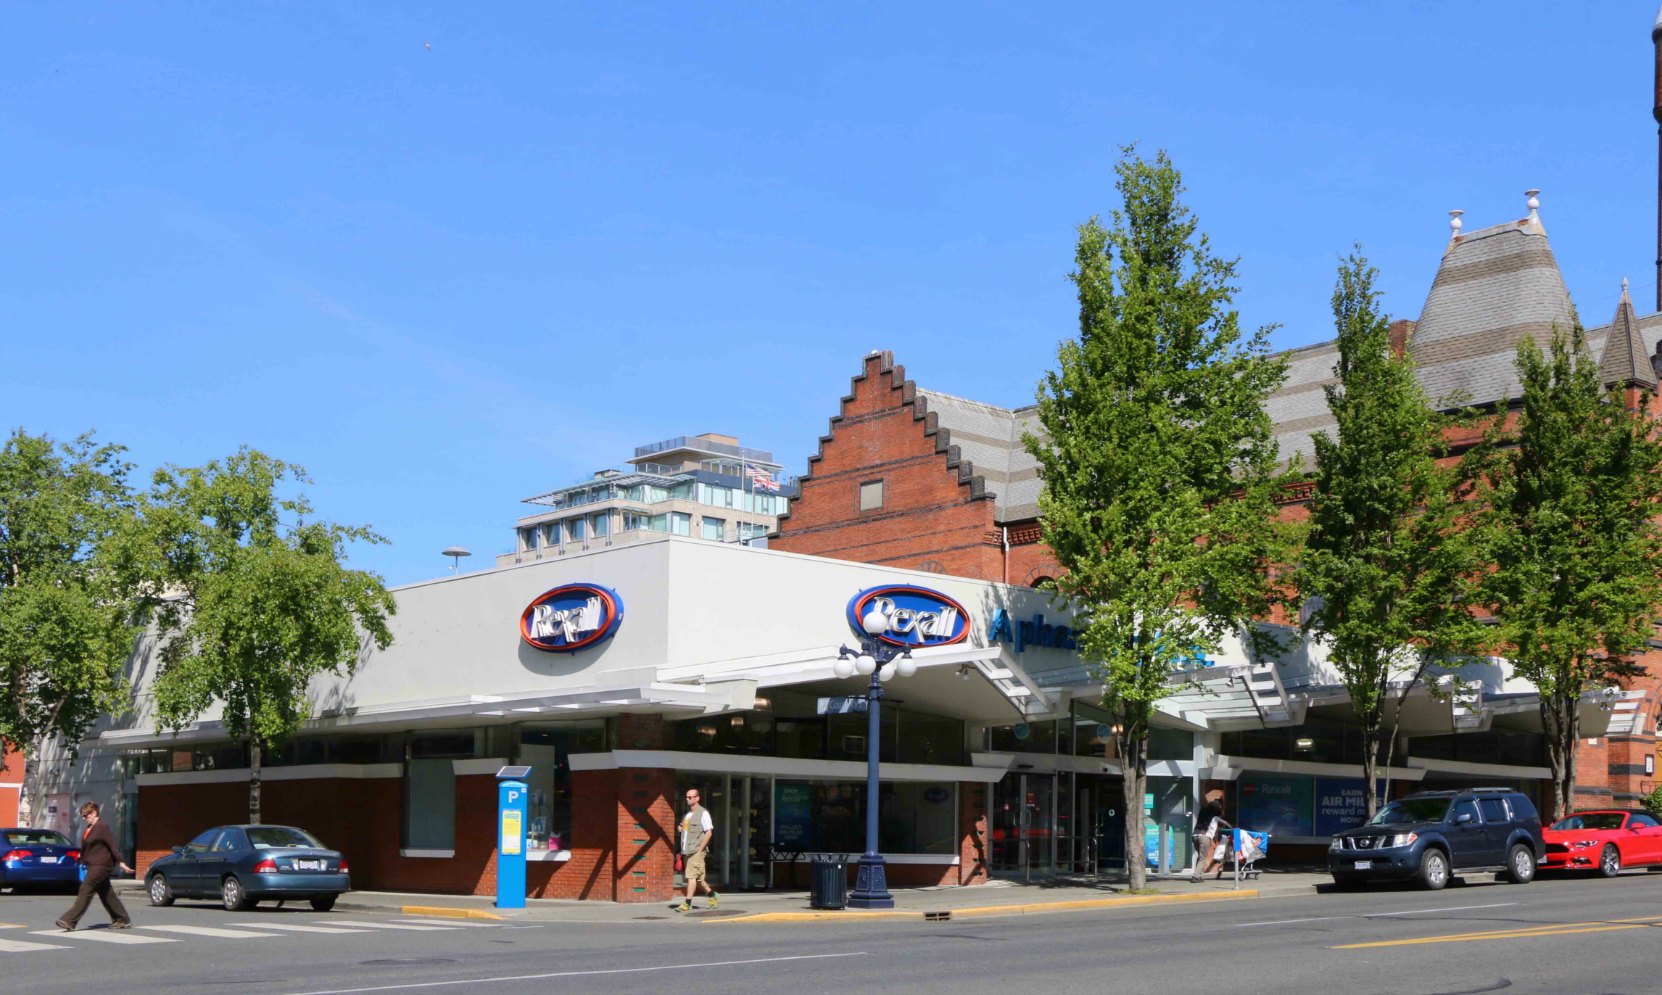 Rexall Drugs, 912 Douglas Street, occupies a building that was designed by architect John Di Castri.